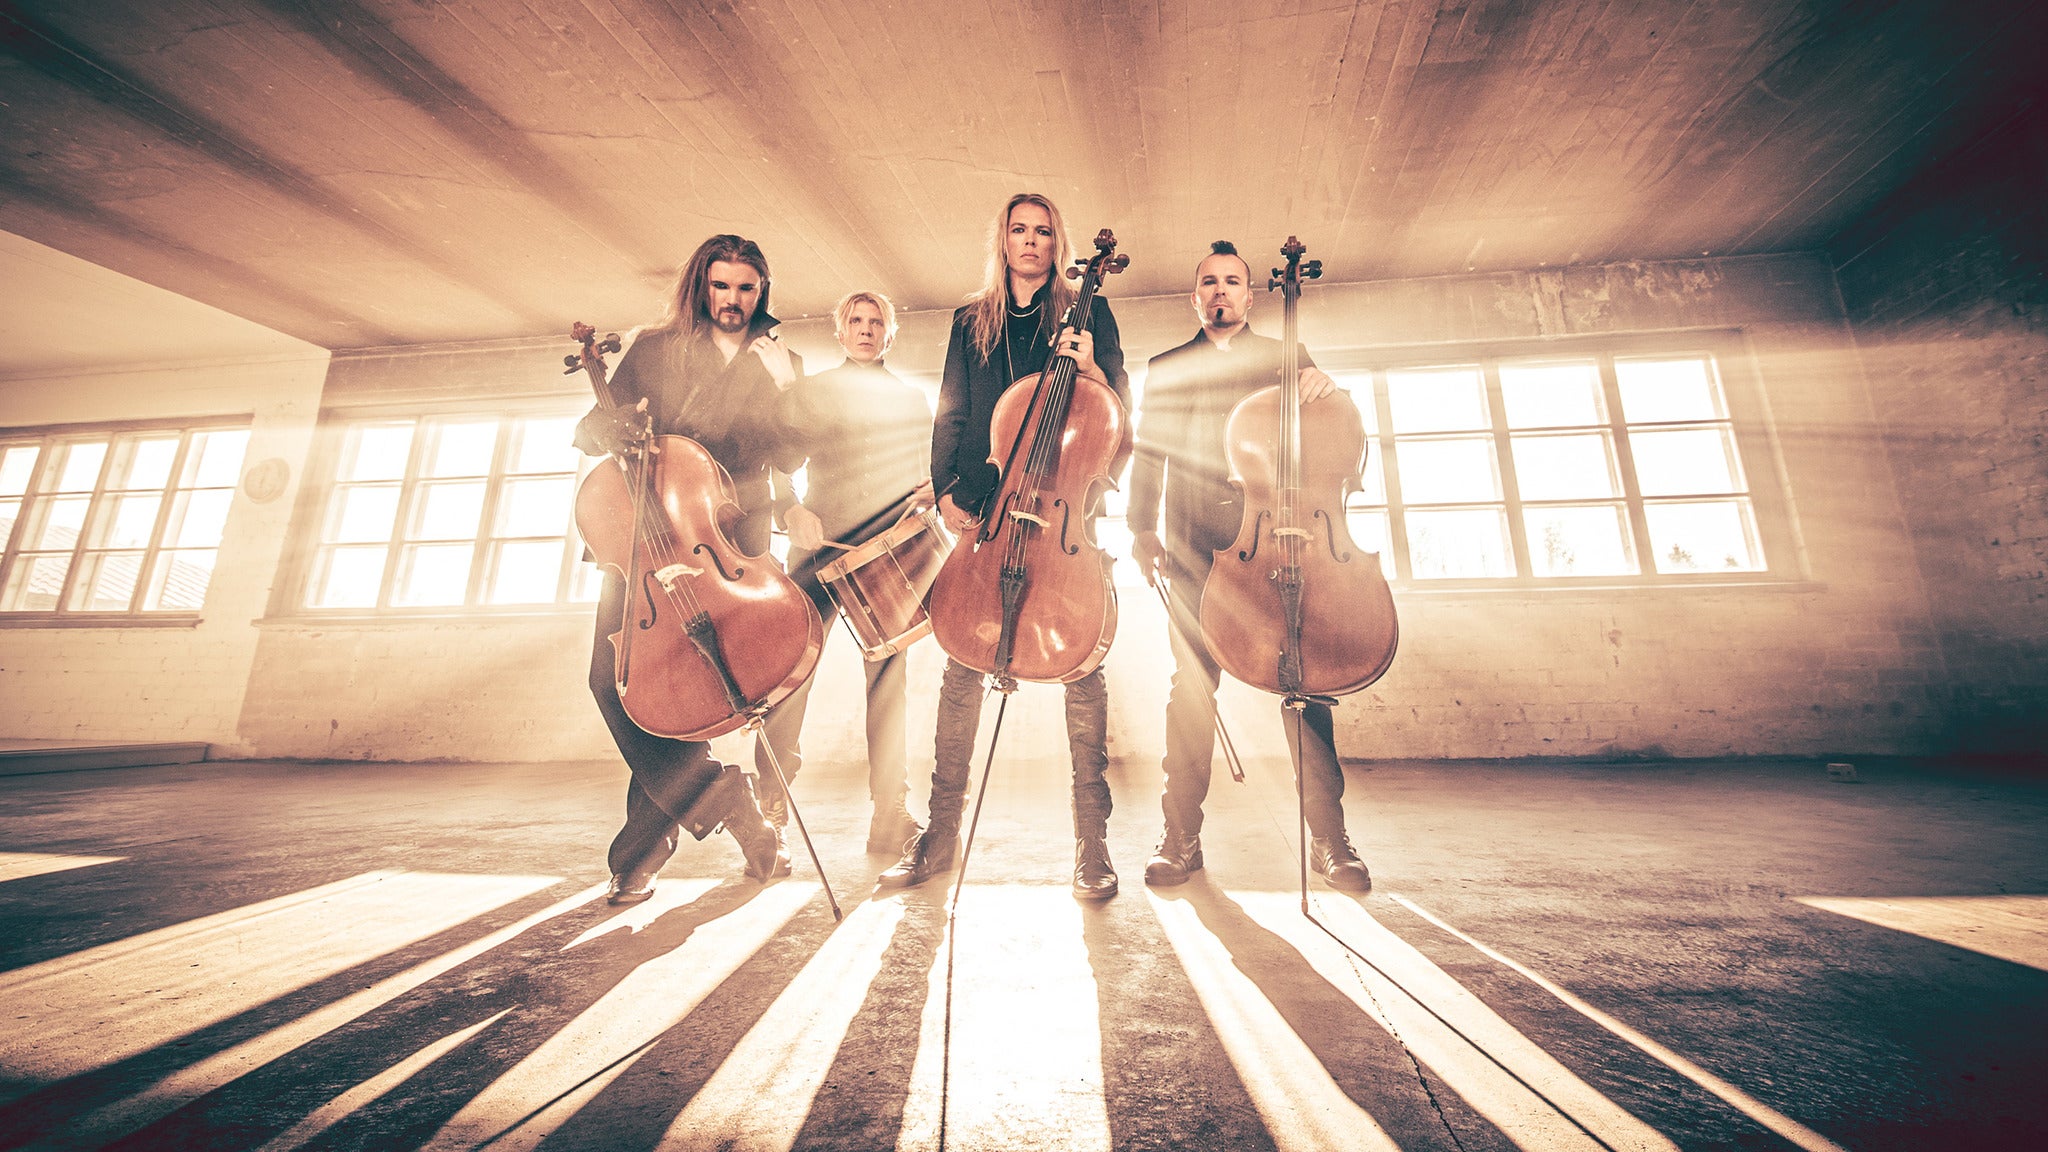 Apocalyptica - Cell-0Tour presale code for performance tickets in Philadelphia, PA (Theatre of Living Arts)